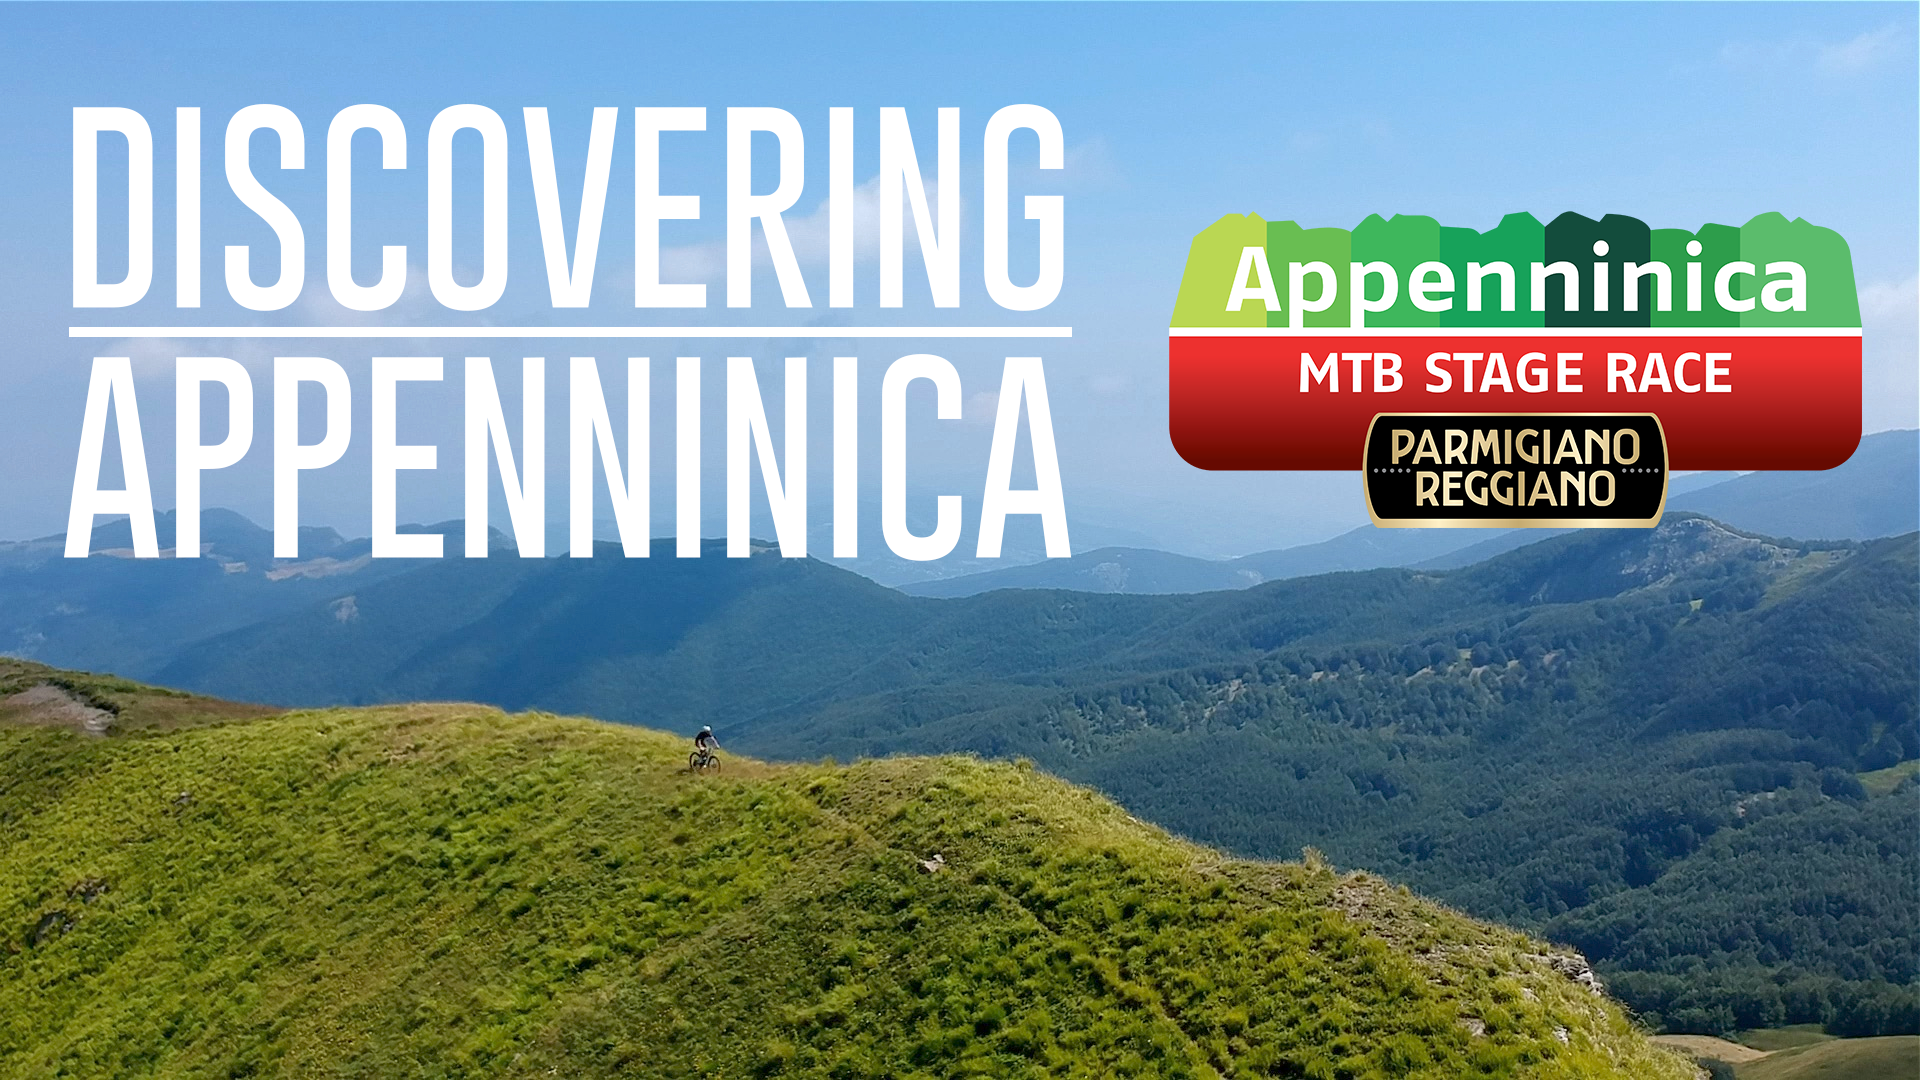 VIDEO: More than a Pro rider. Andrea Tiberi discovers the Appenninica experience  